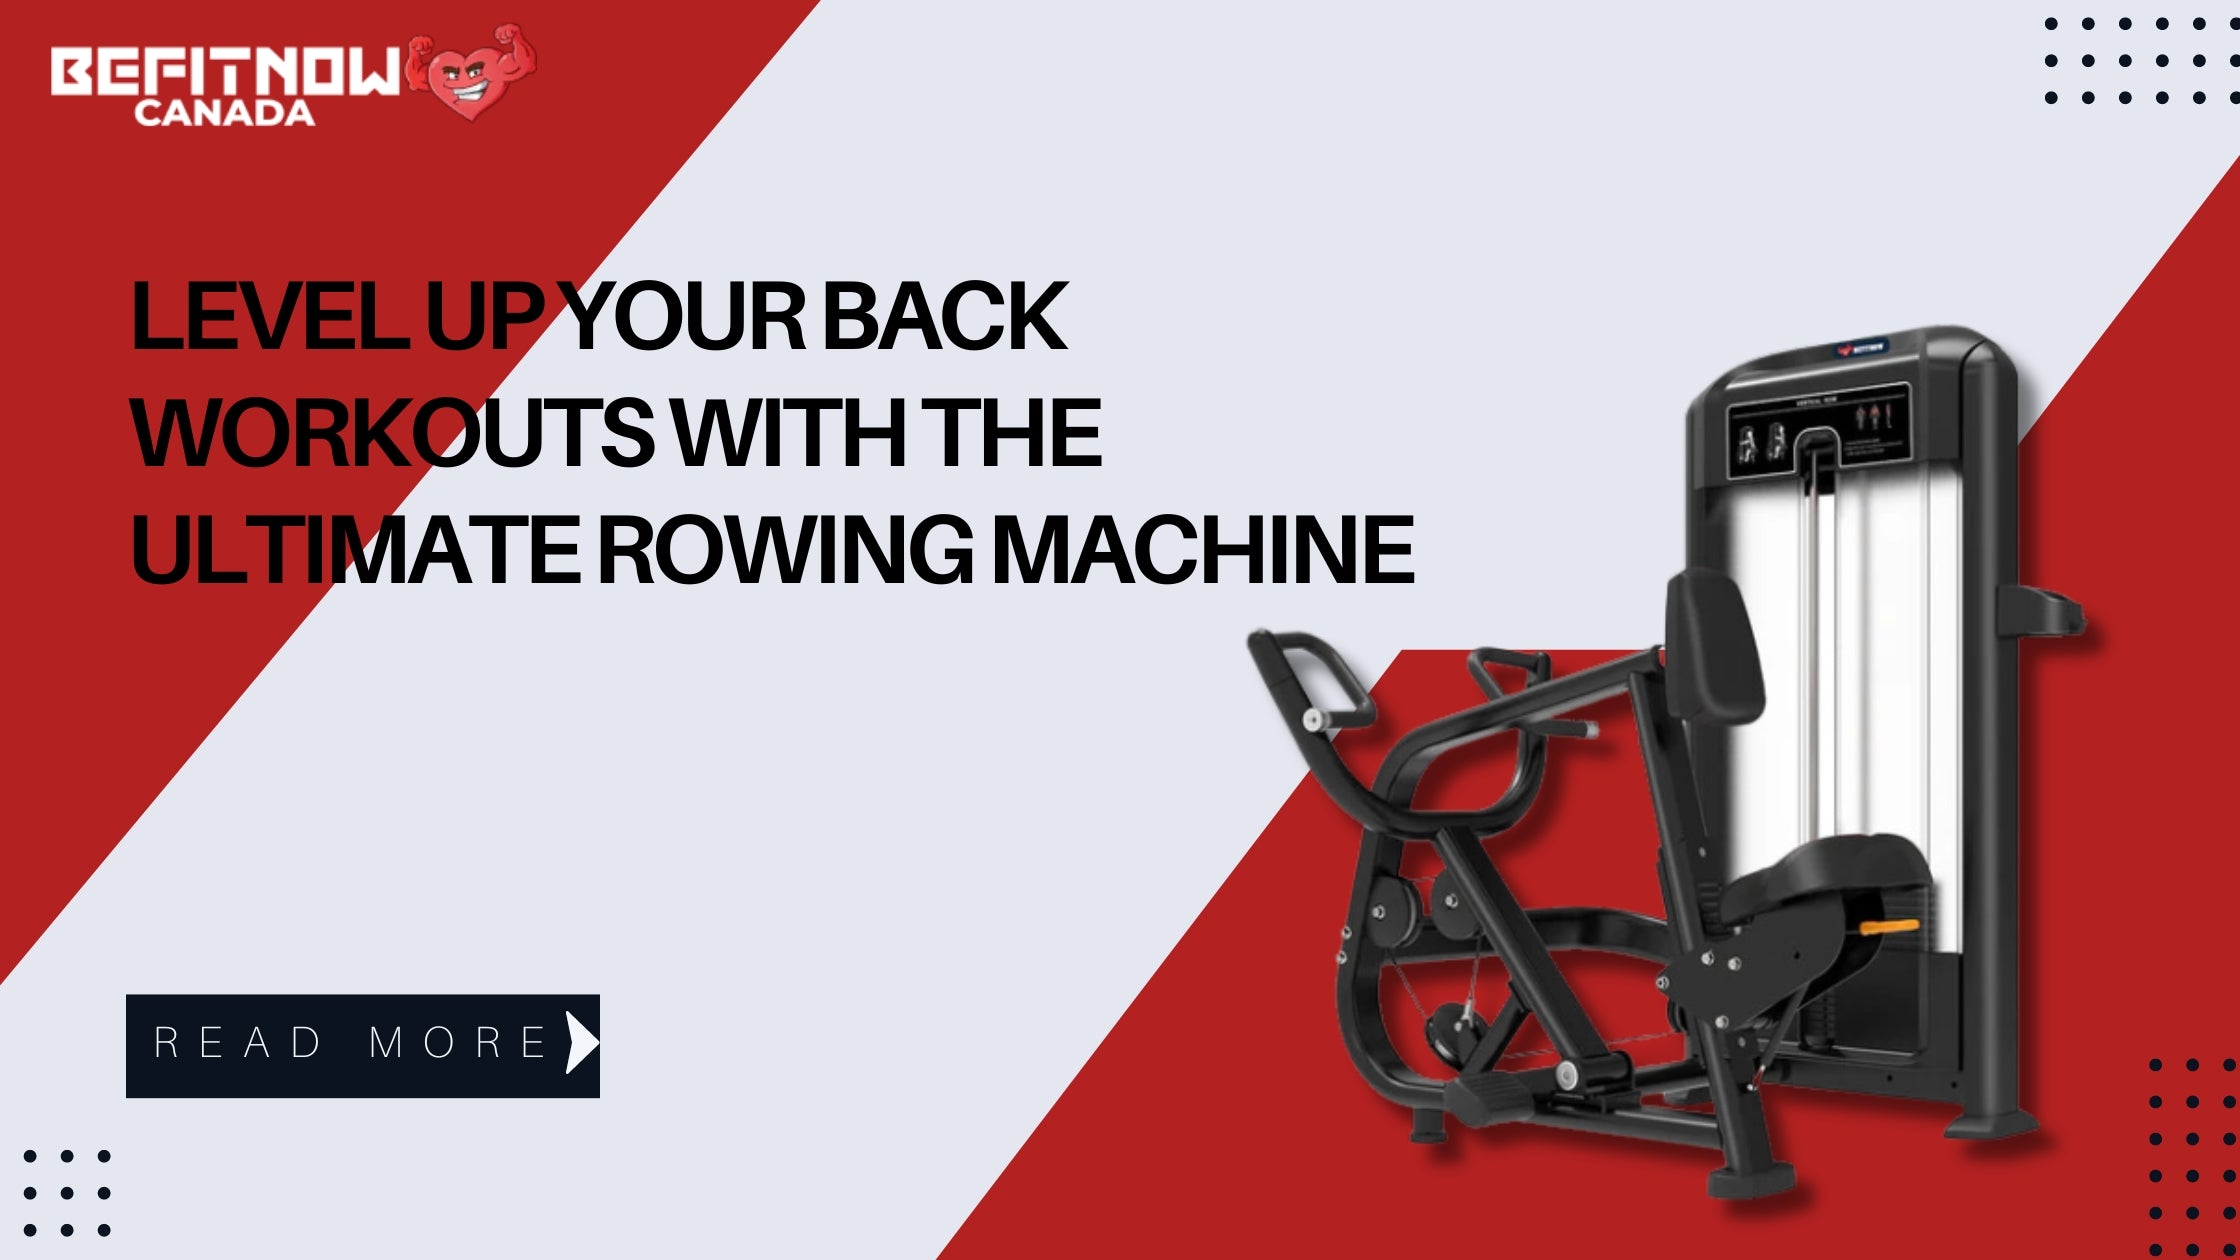 Level Up Your Back Workouts with the Ultimate Rowing Machine